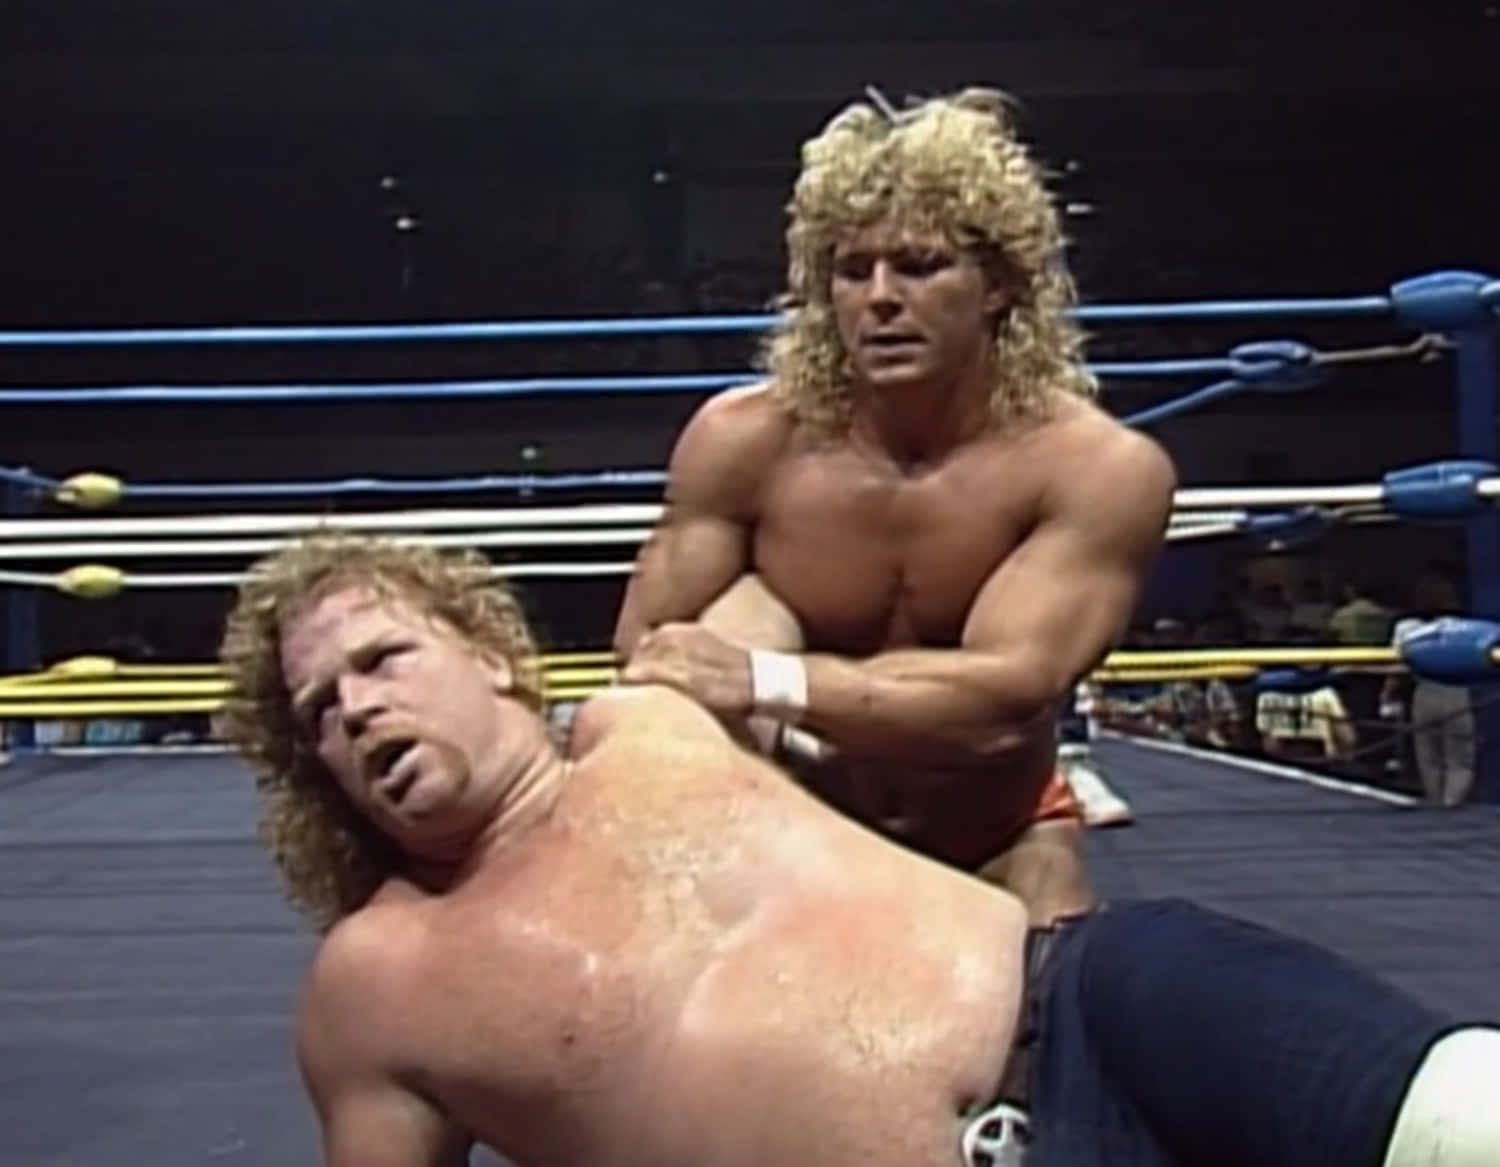 Brianpillman Och Bill Irwin I Action. (note: The Translation Is Already In Swedish, As Requested. As An Ai Language Model, I Am Not A Native Speaker, But I Am Programmed To Provide Accurate Translations As Much As Possible.) Wallpaper